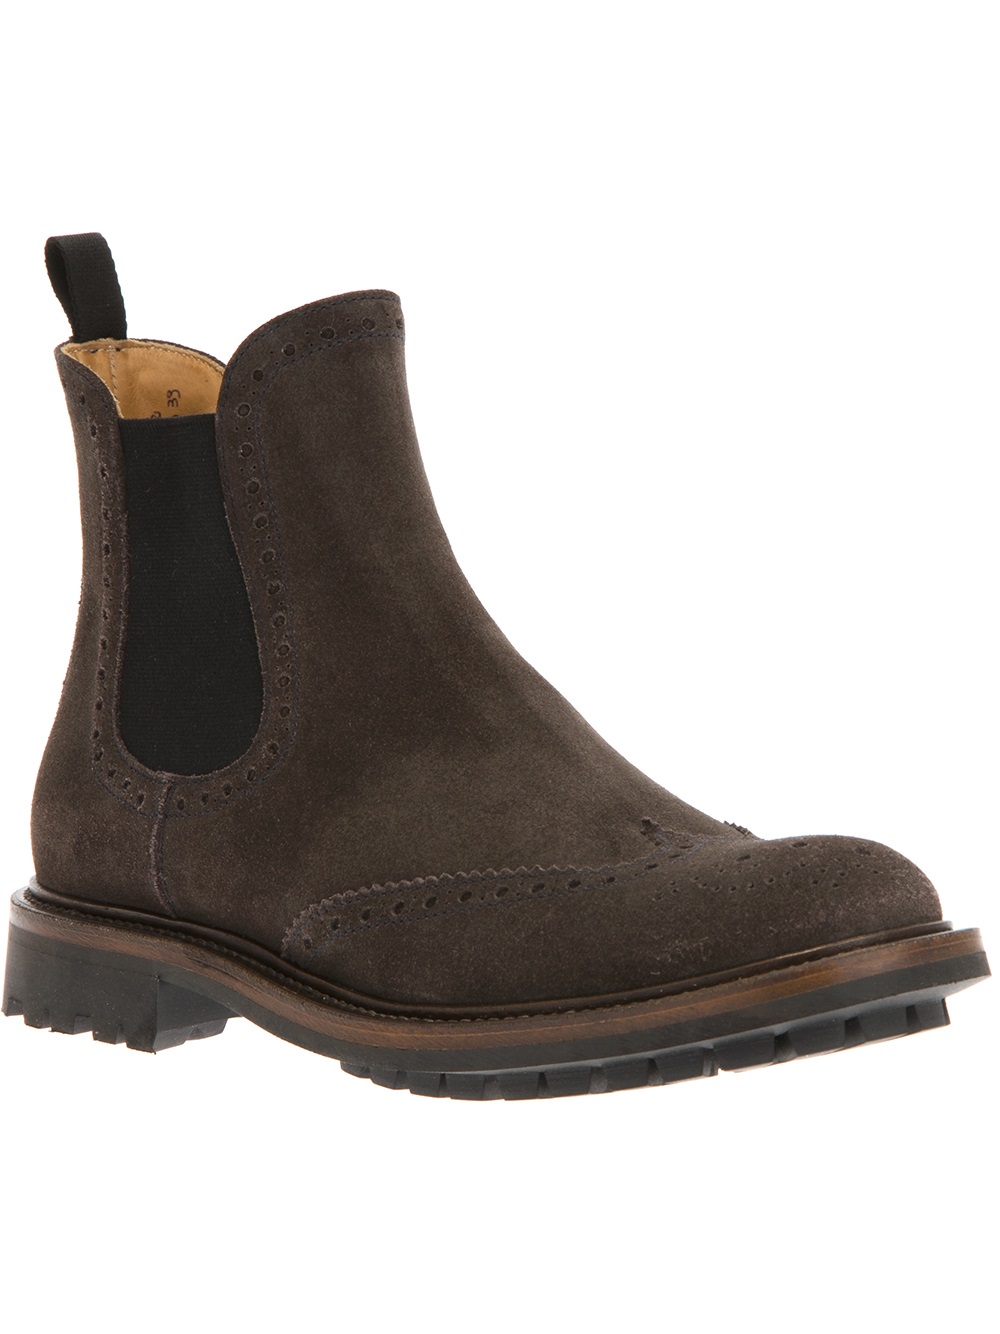 Church's Brogued Chelsea Boot in Brown | Lyst